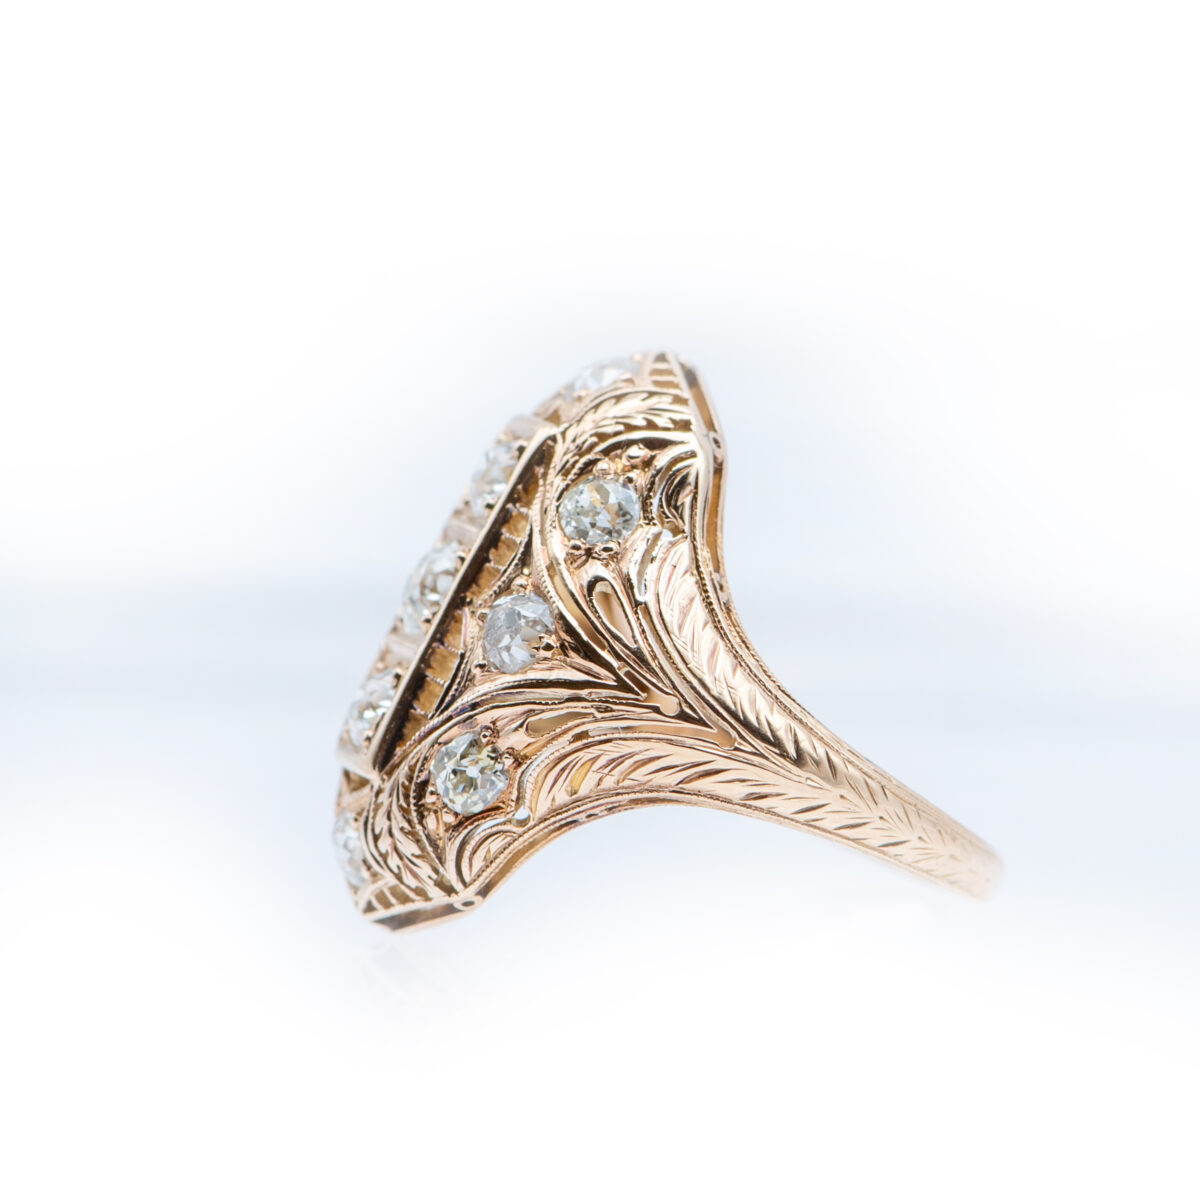 Gold Vintage Estate Ring with Mine-Cut Diamonds2